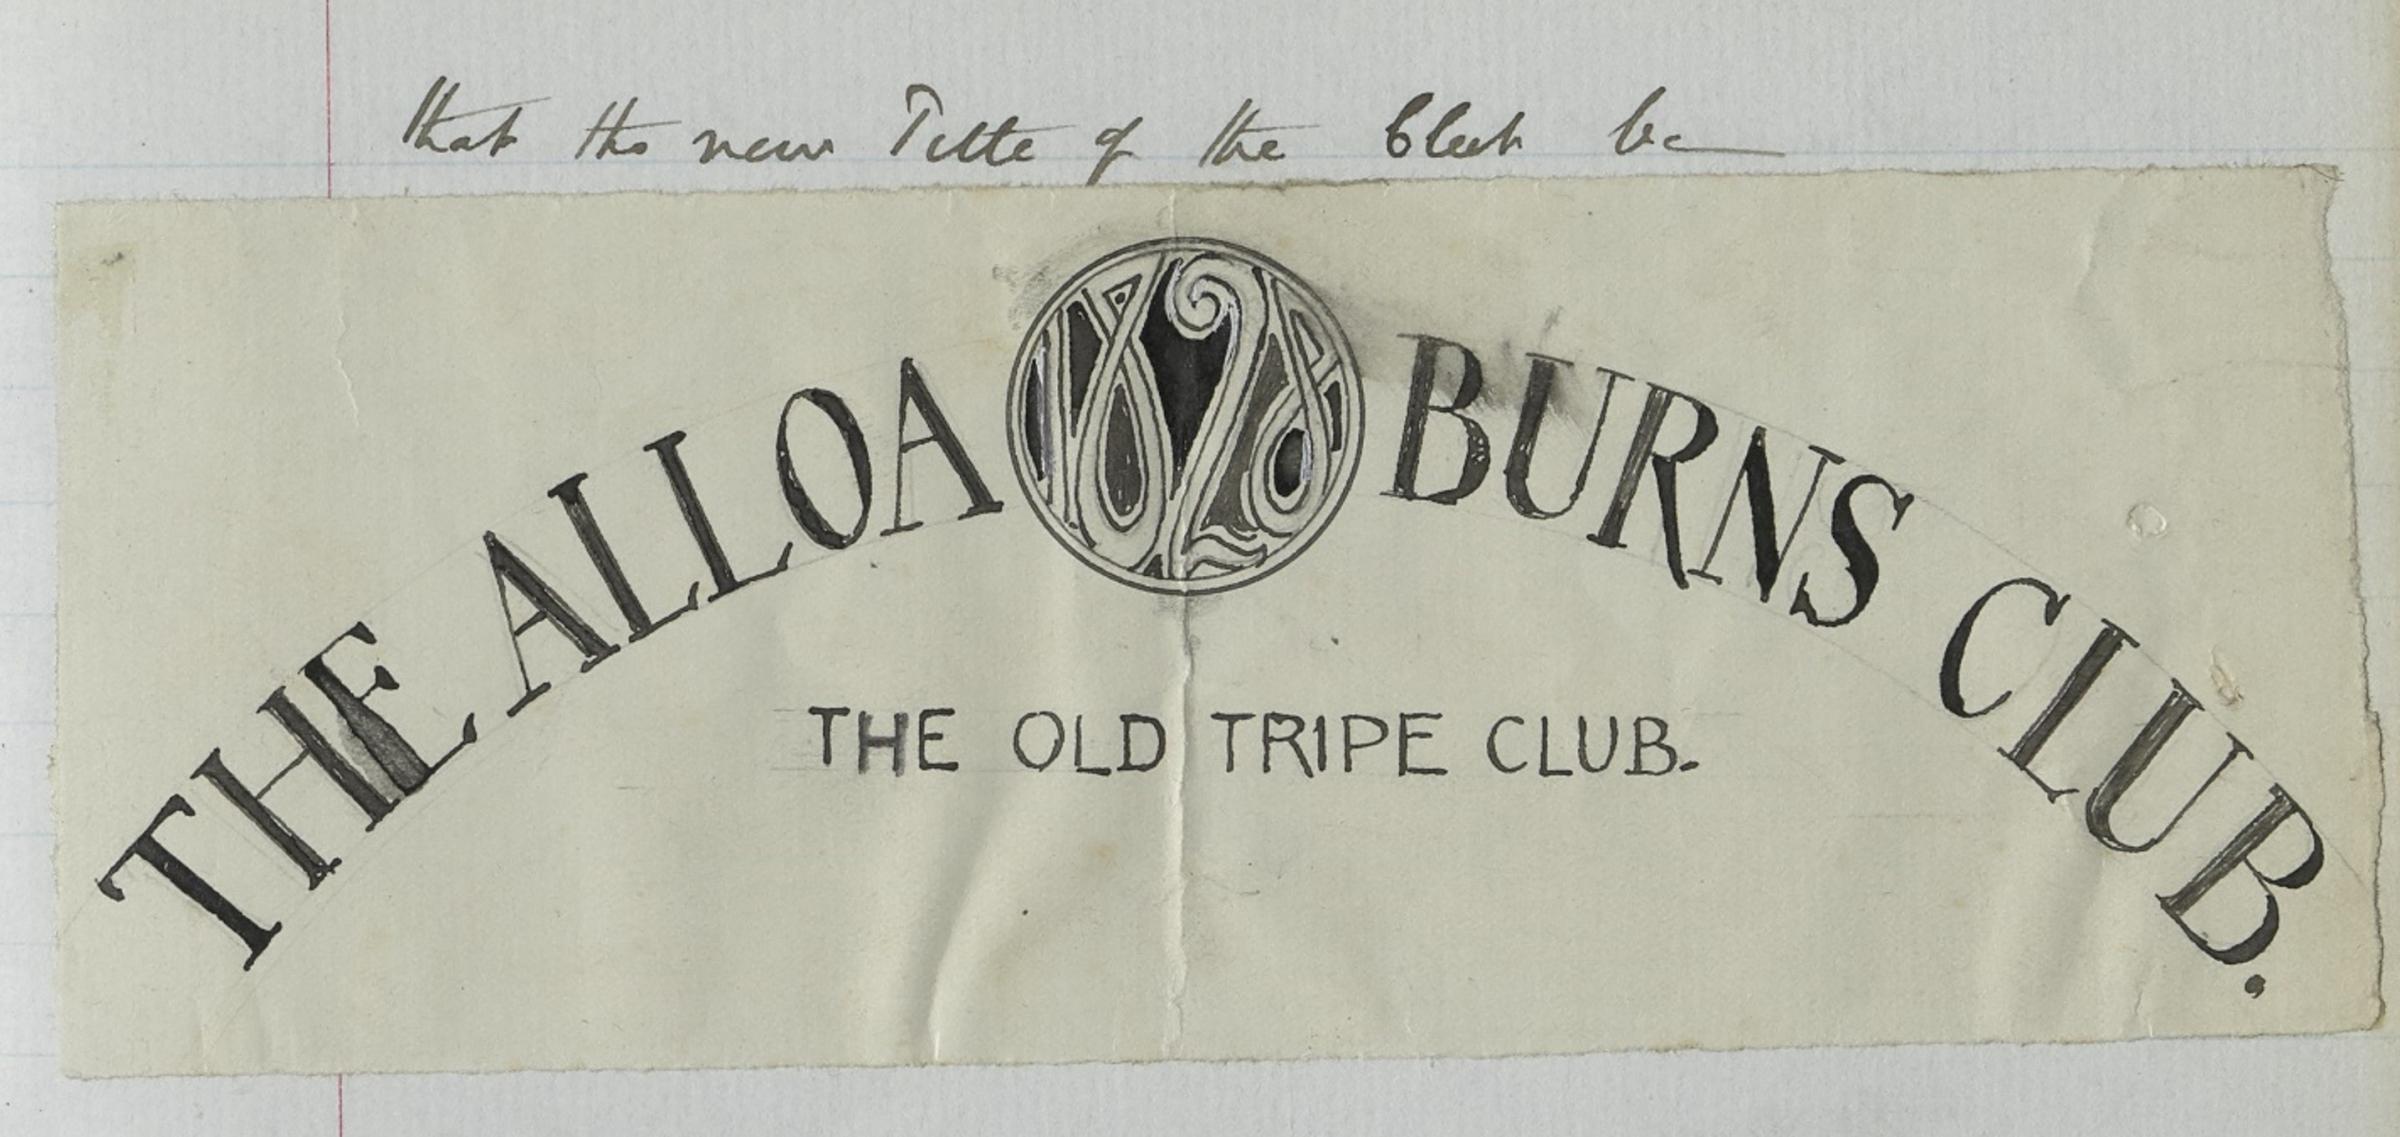 THE OLD TRIPE CLUB: The first record of the club changing its name